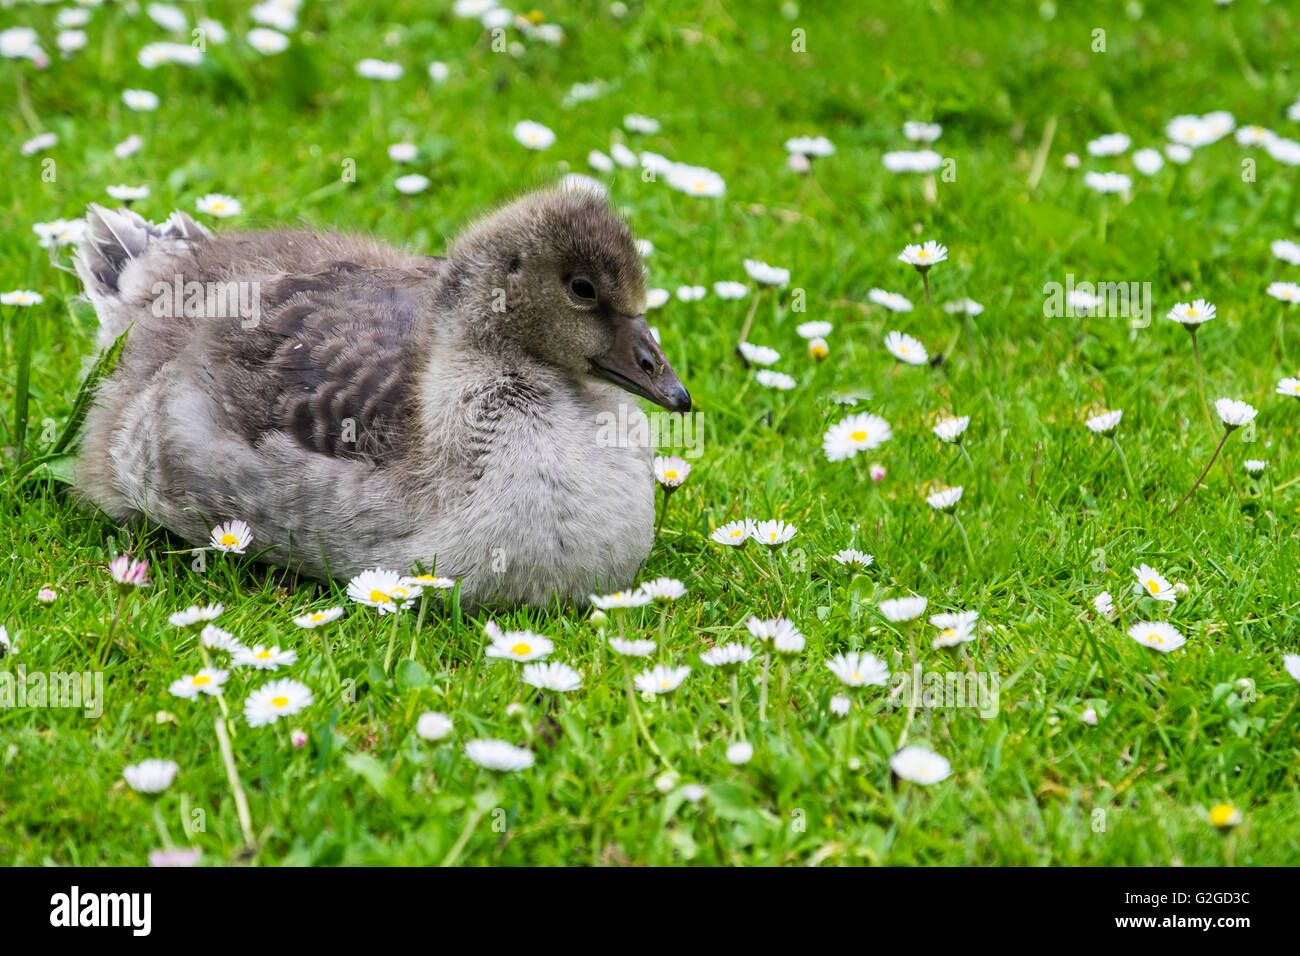 Cute gosling sitting on the grass amongst daisies Stock Photo